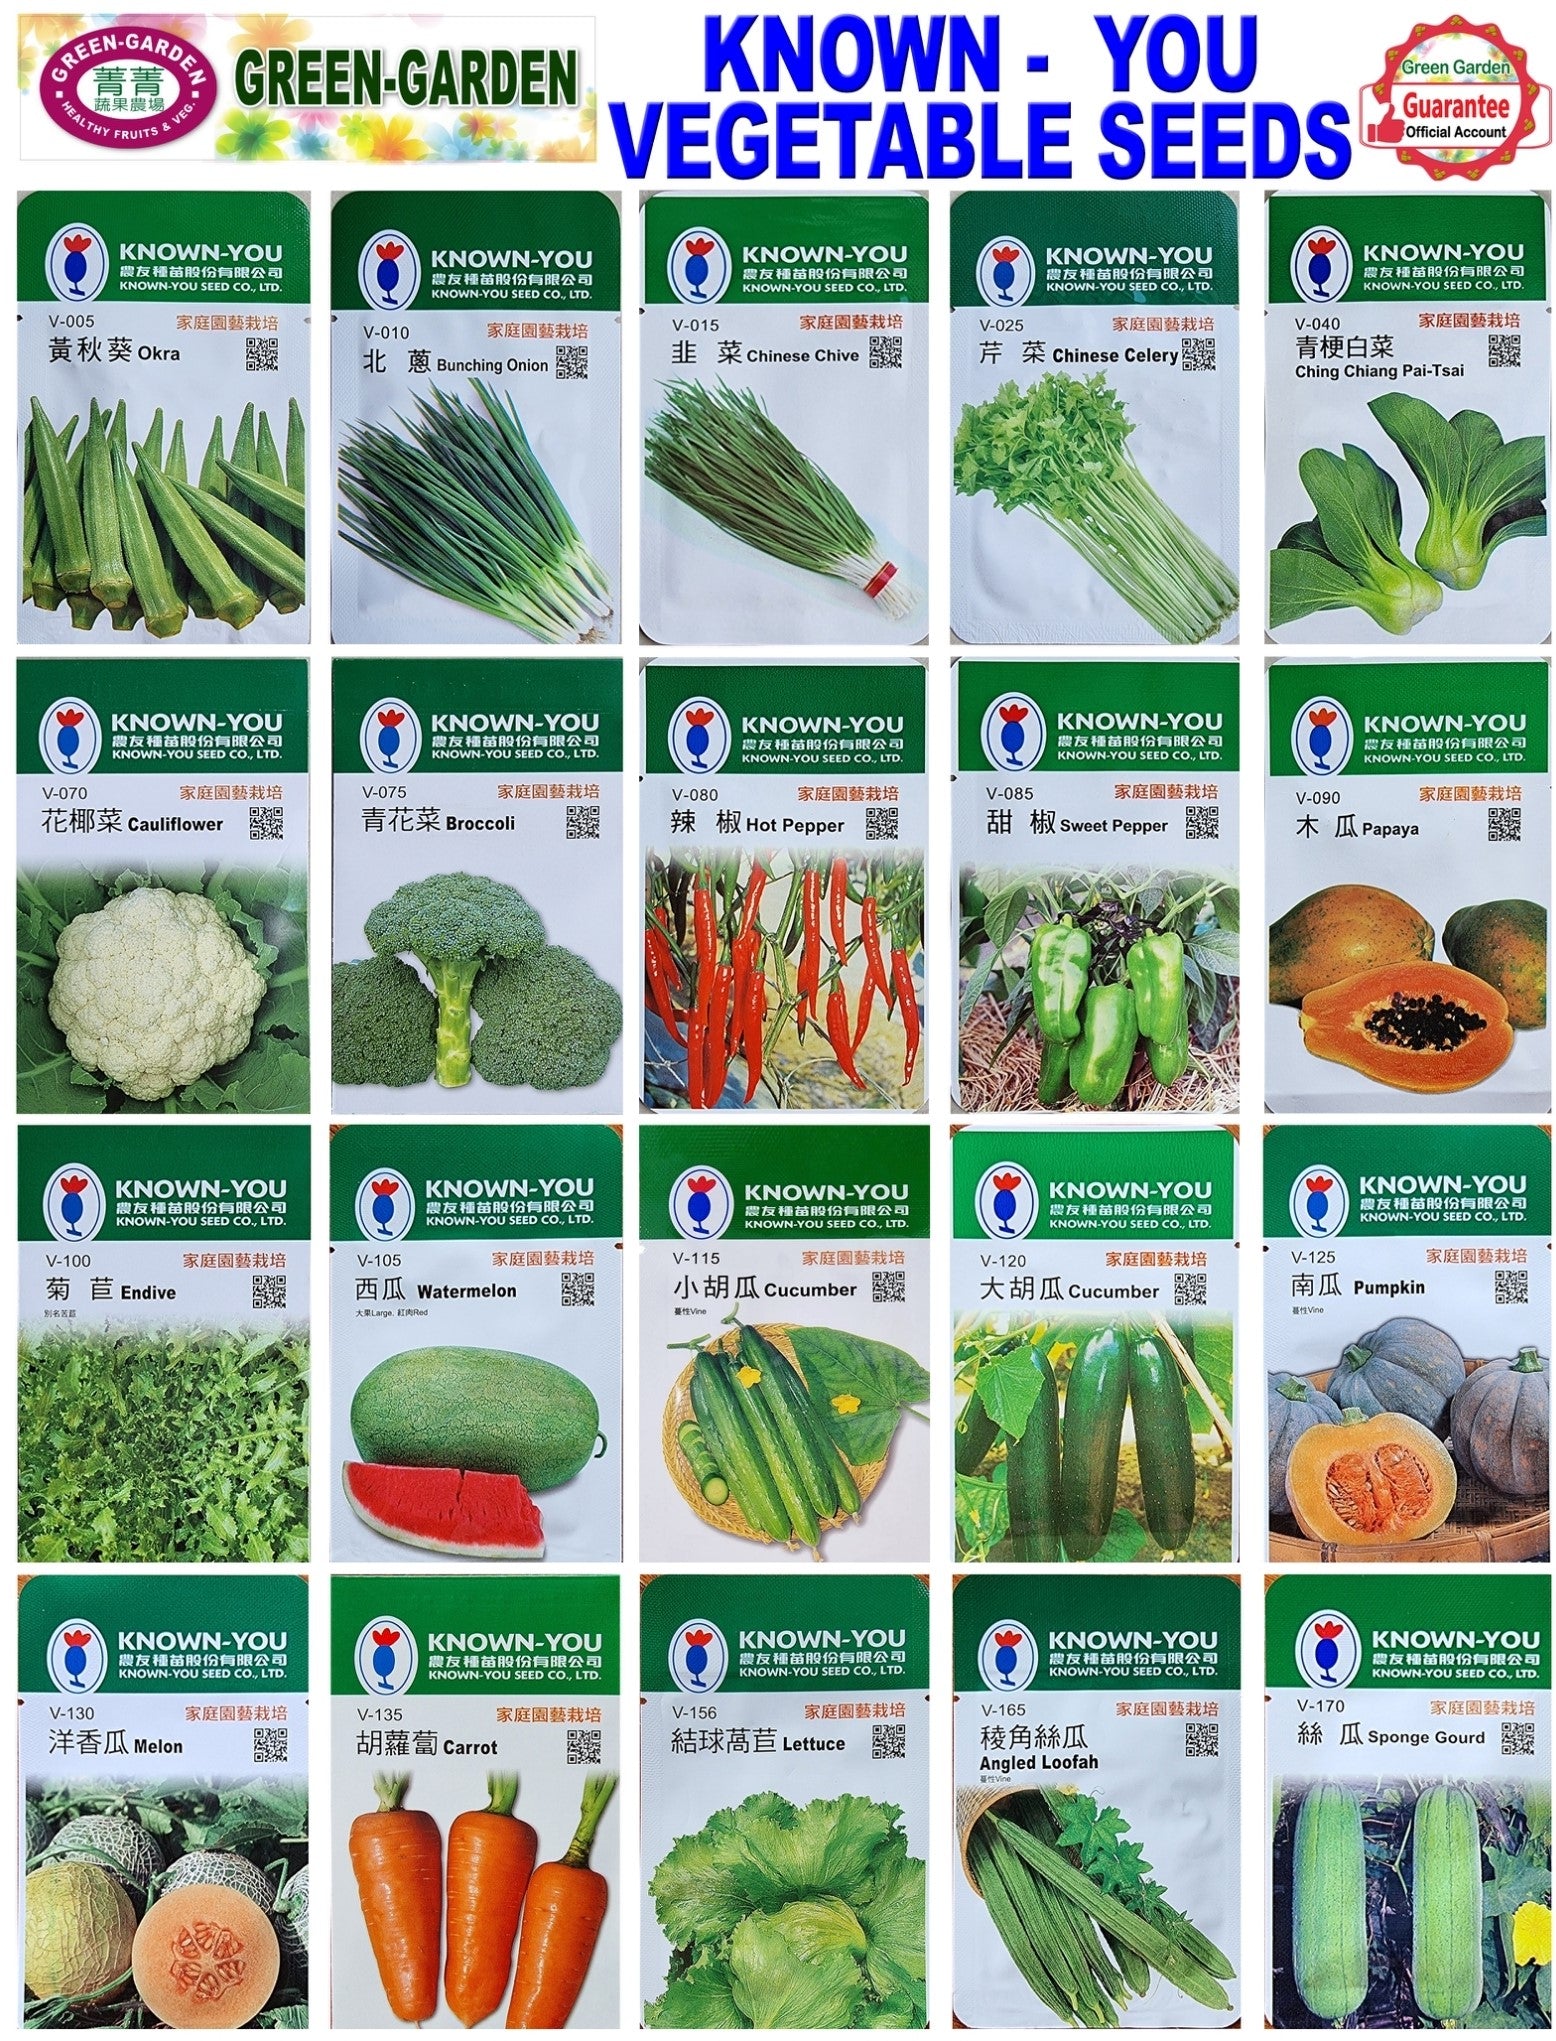 Known You Vegetable Seeds (V-010 Bunching Onion)